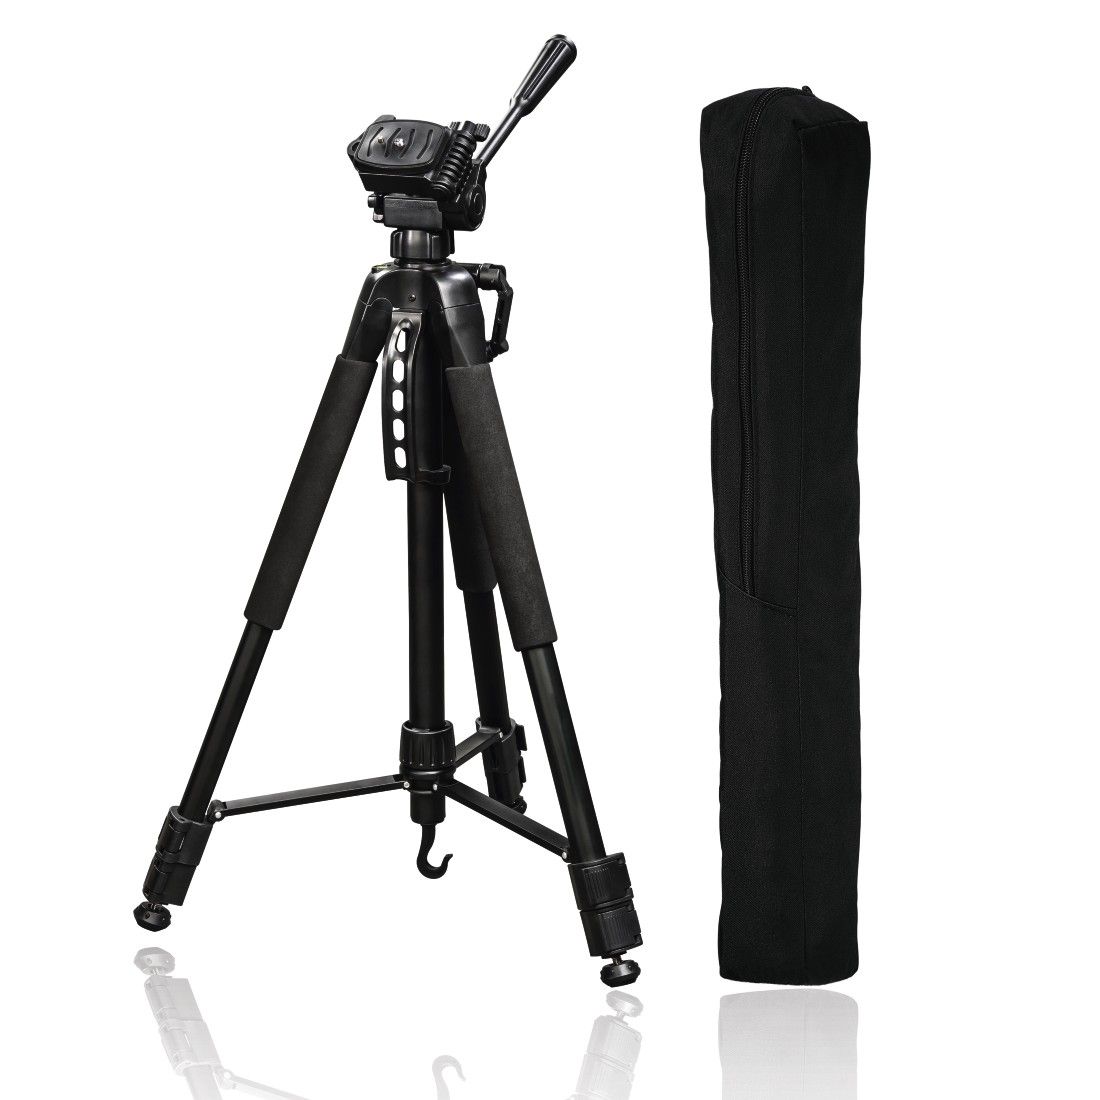 Hama Action 165 3D Tripod with 3-Way Head and Spikes 165cm